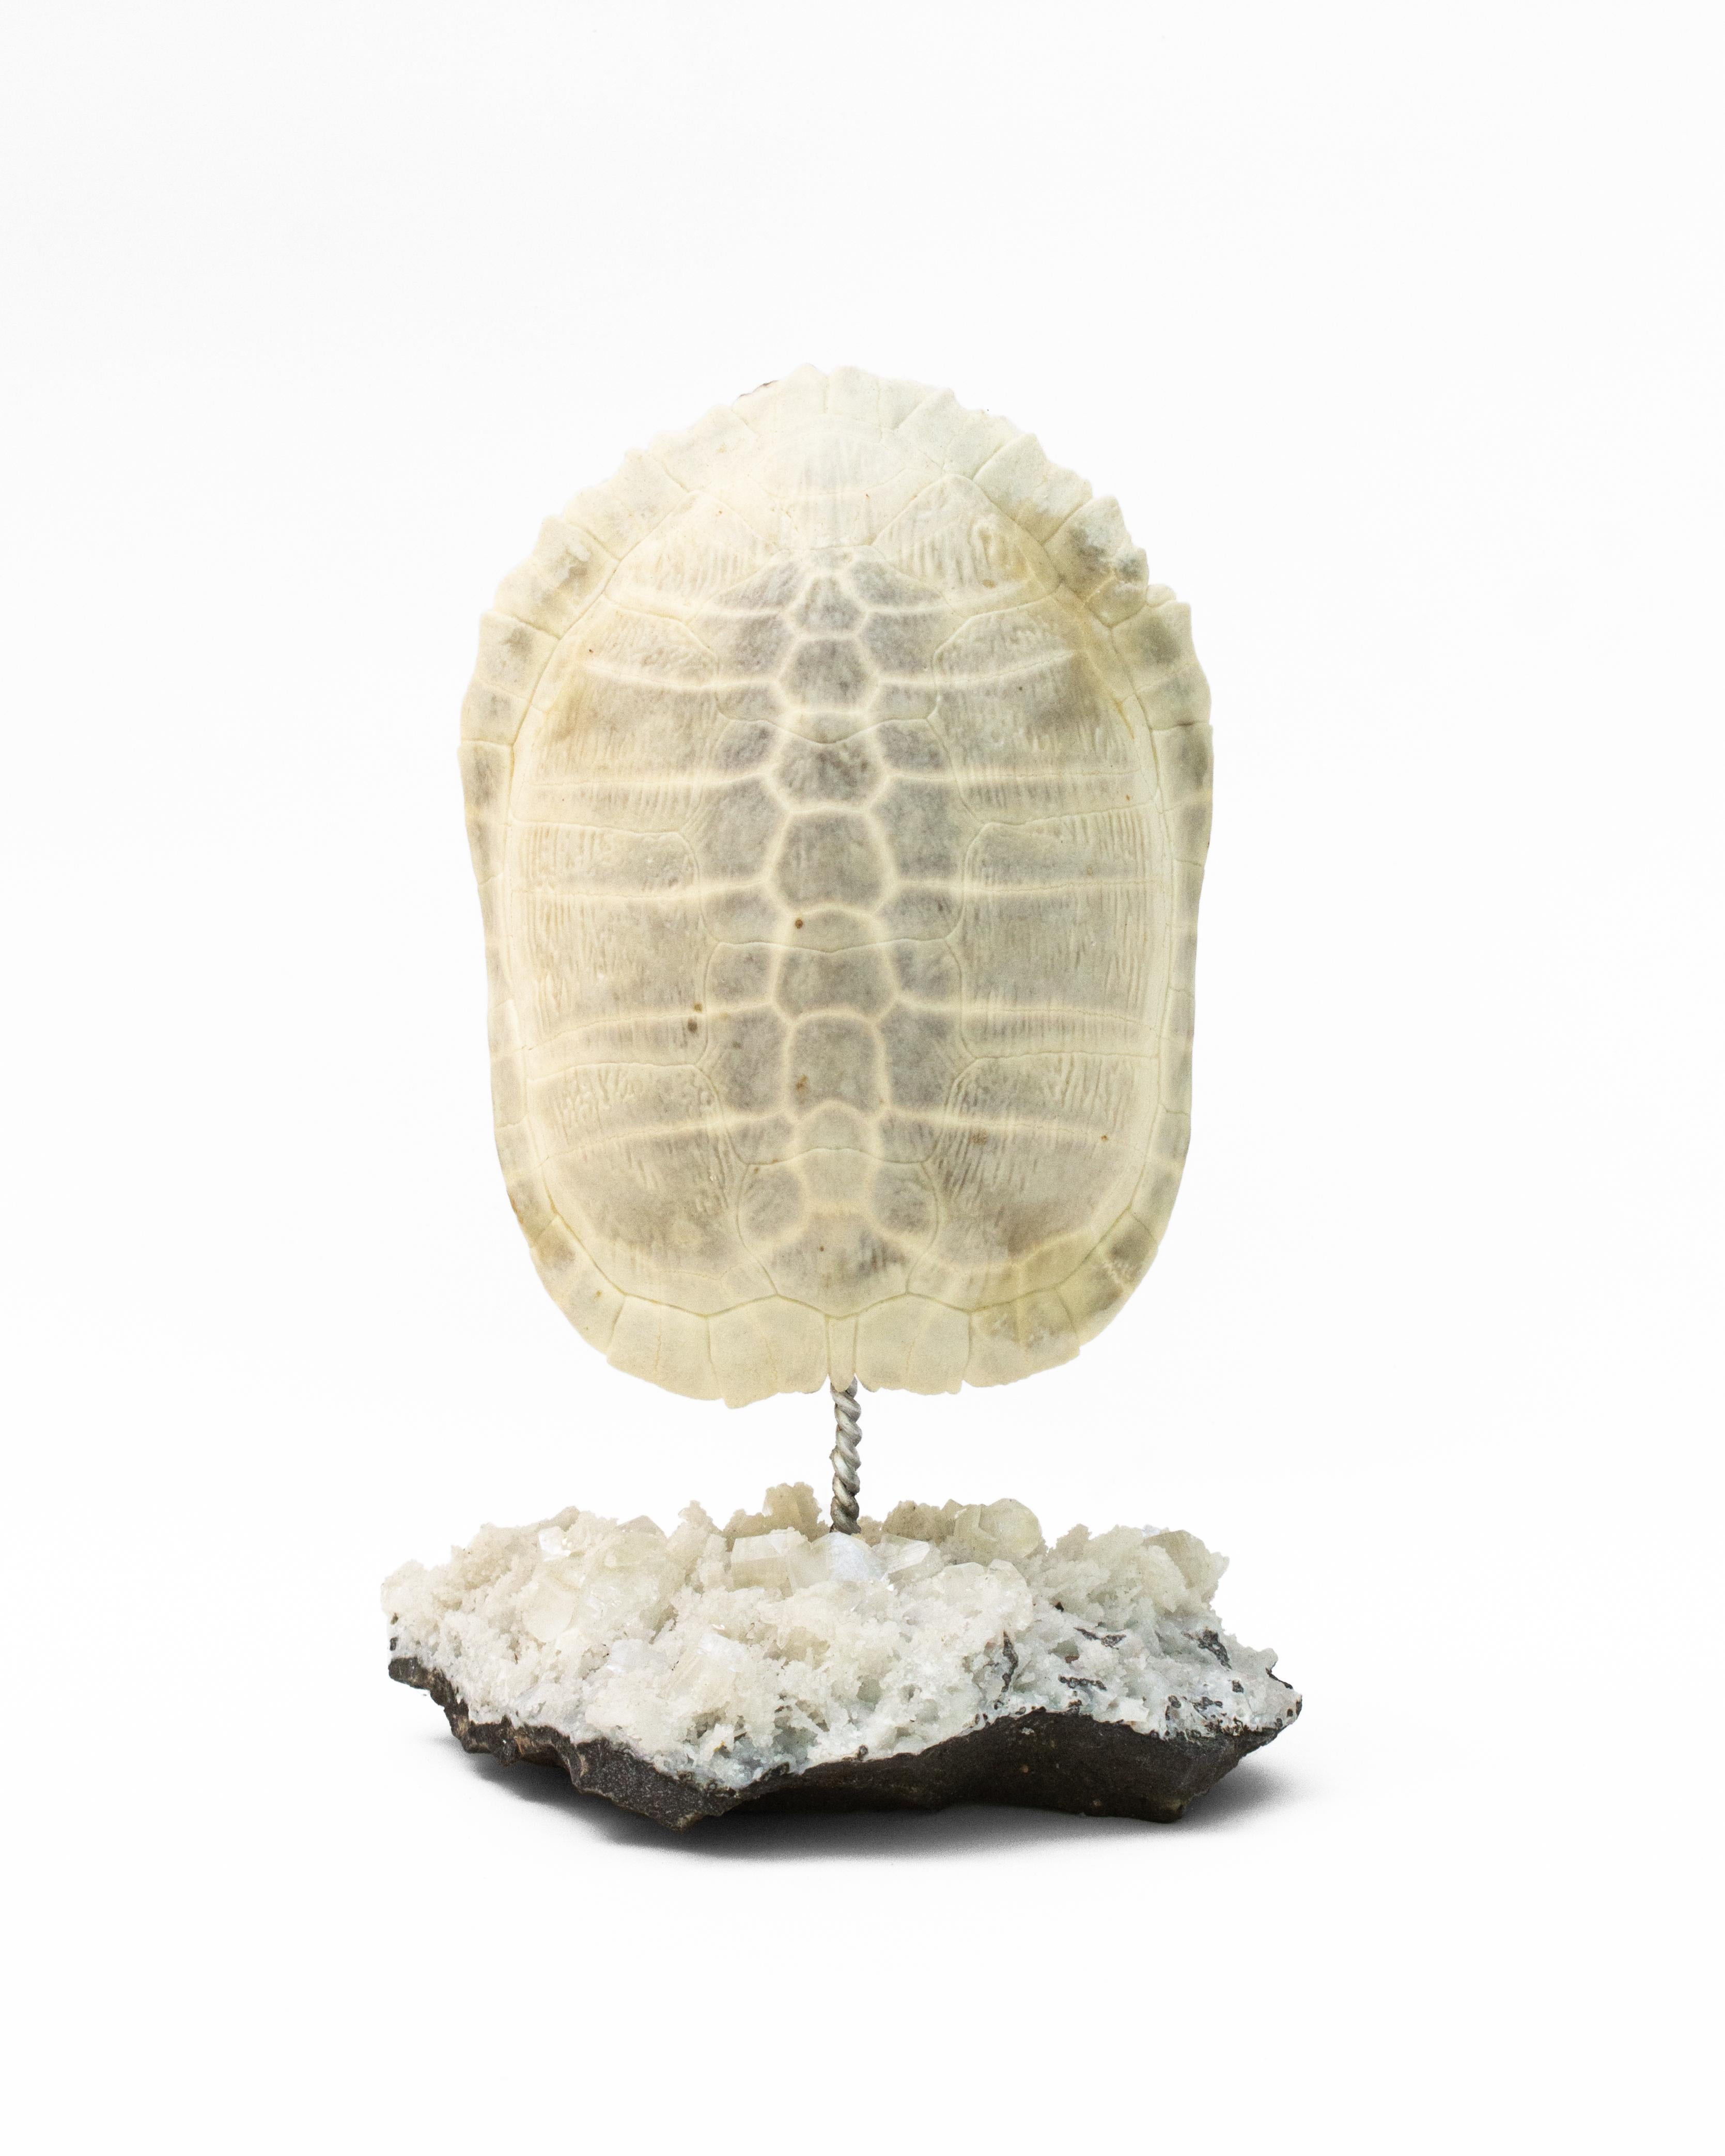 Bleached turtle shell mounted on a Stilbite and Apophyllite mineral base. 

The turtle shell has been naturally bleached by the sun and mounted on the rare mineral formation. Apophyllite is a mineral occurring typically as white glass prisms,